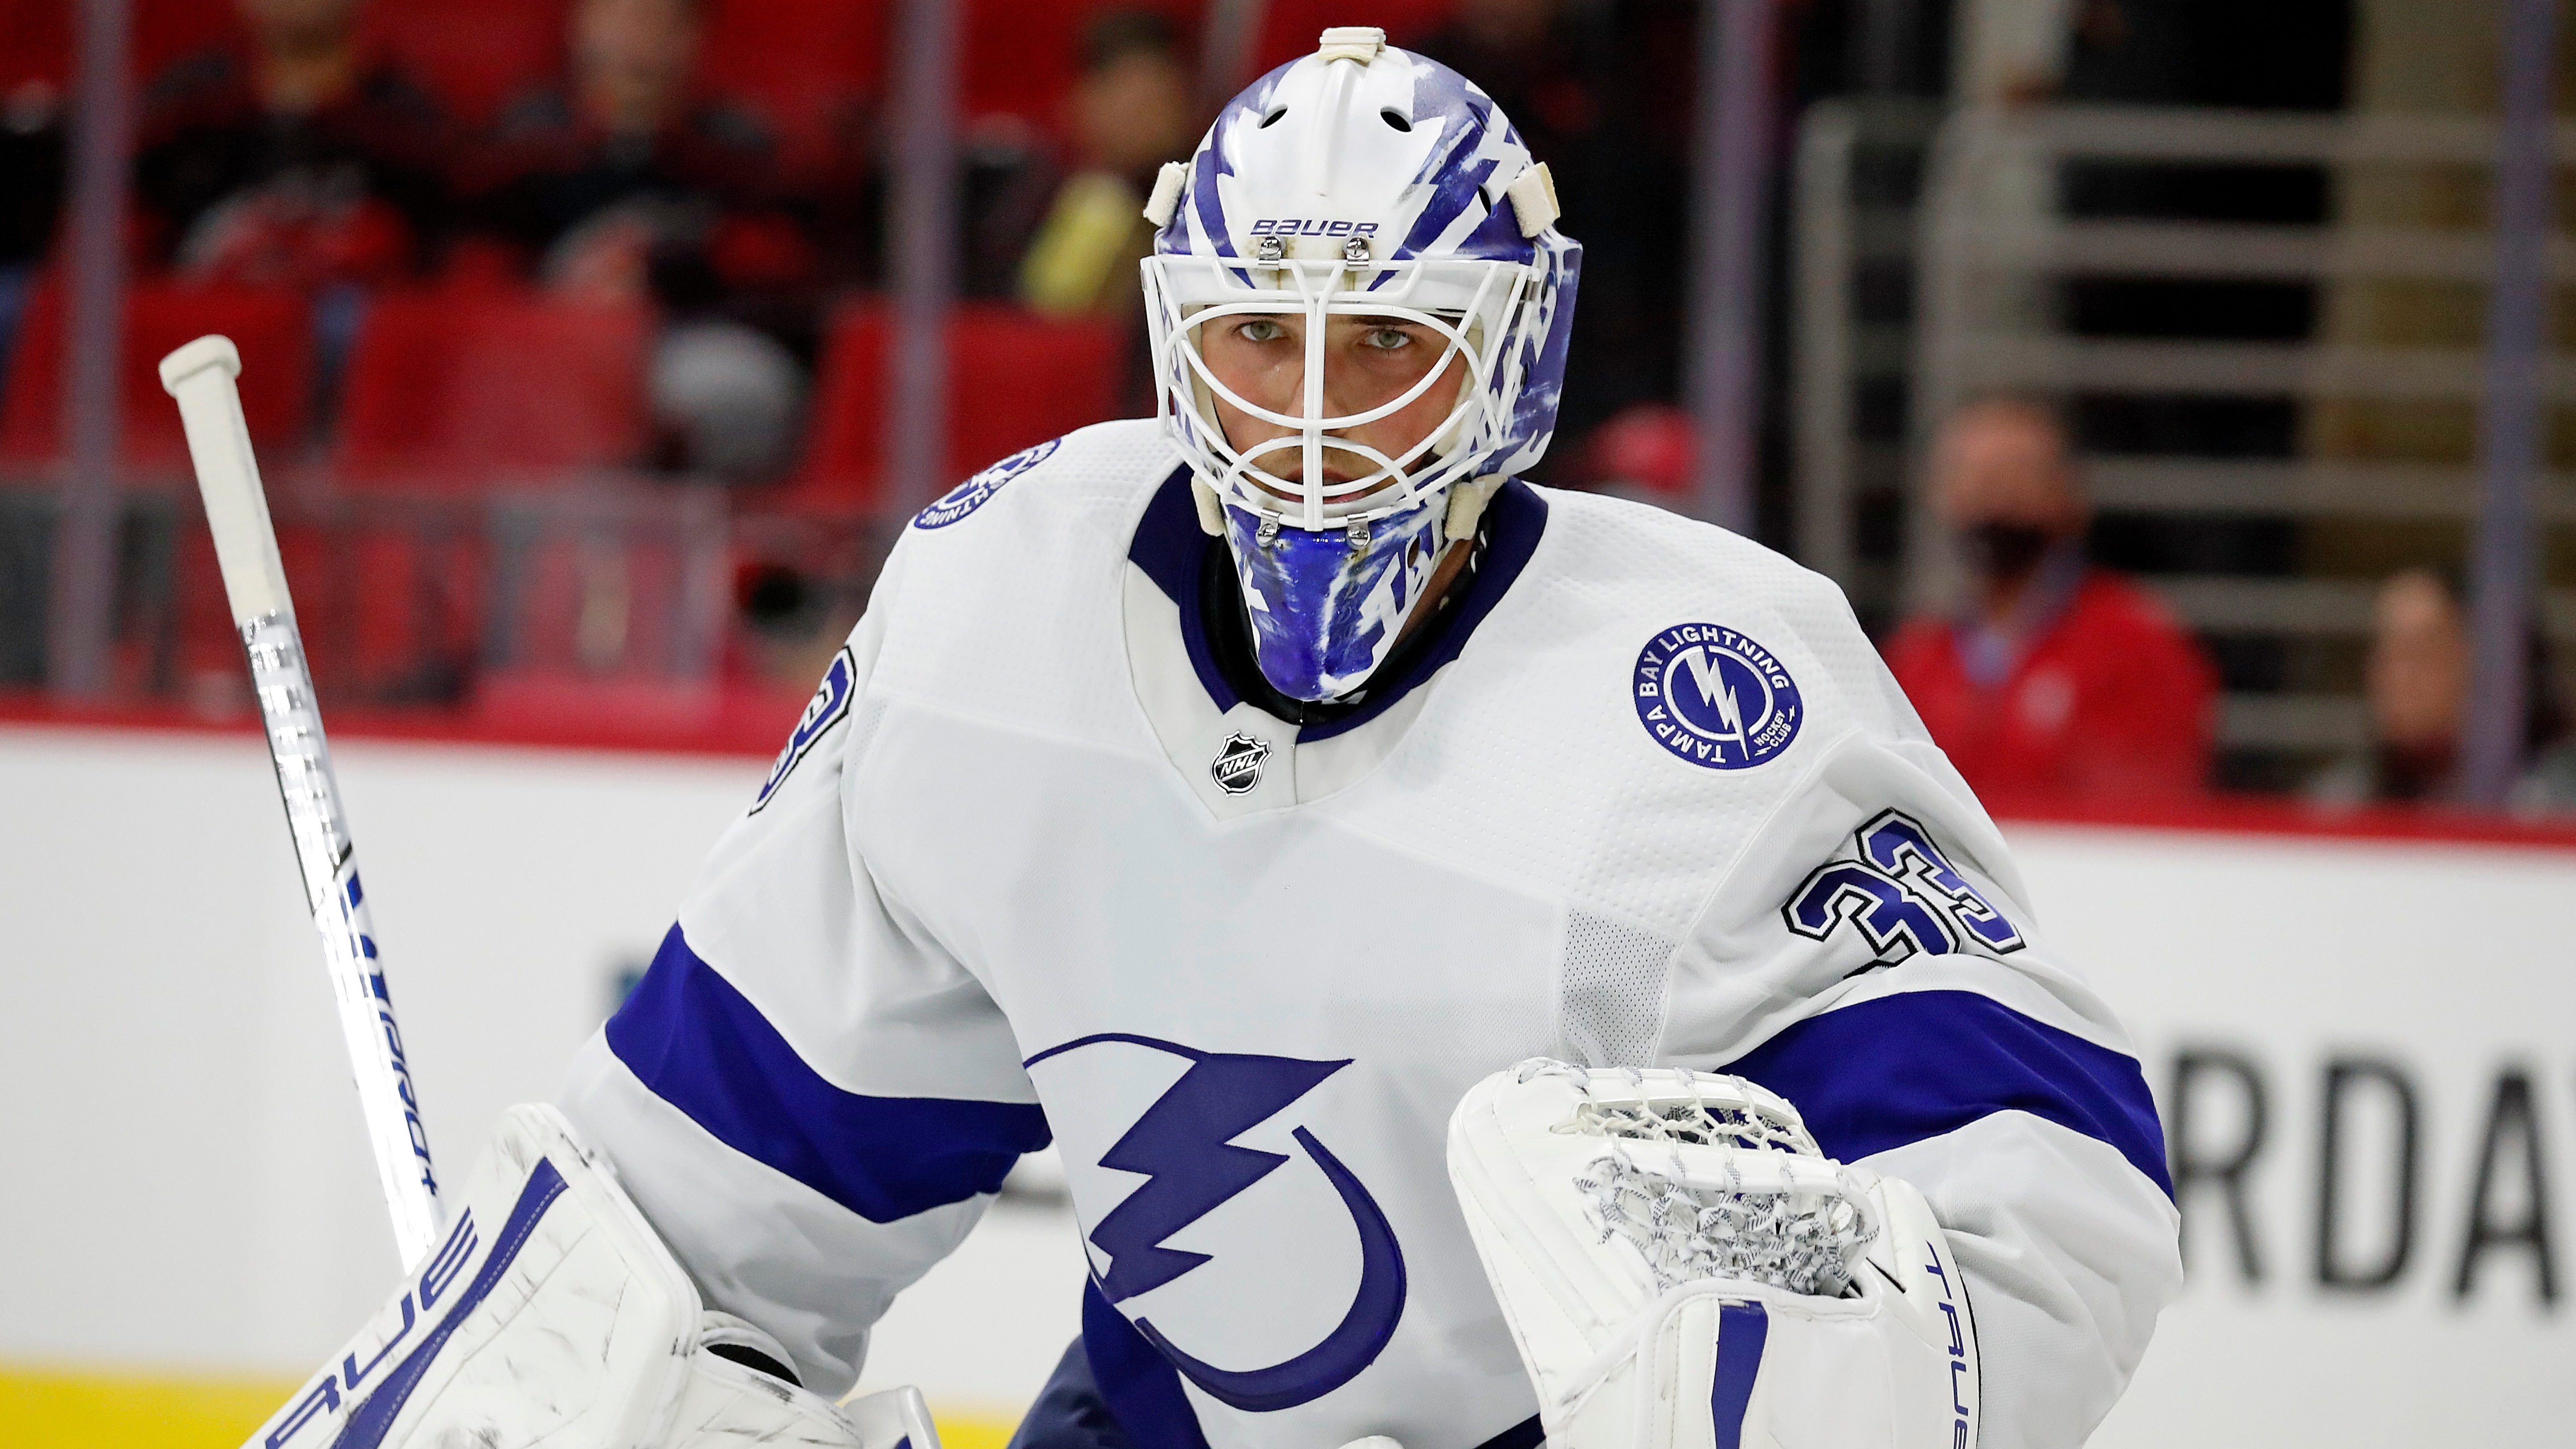 What to expect from the Lightning tonight against the Canadiens